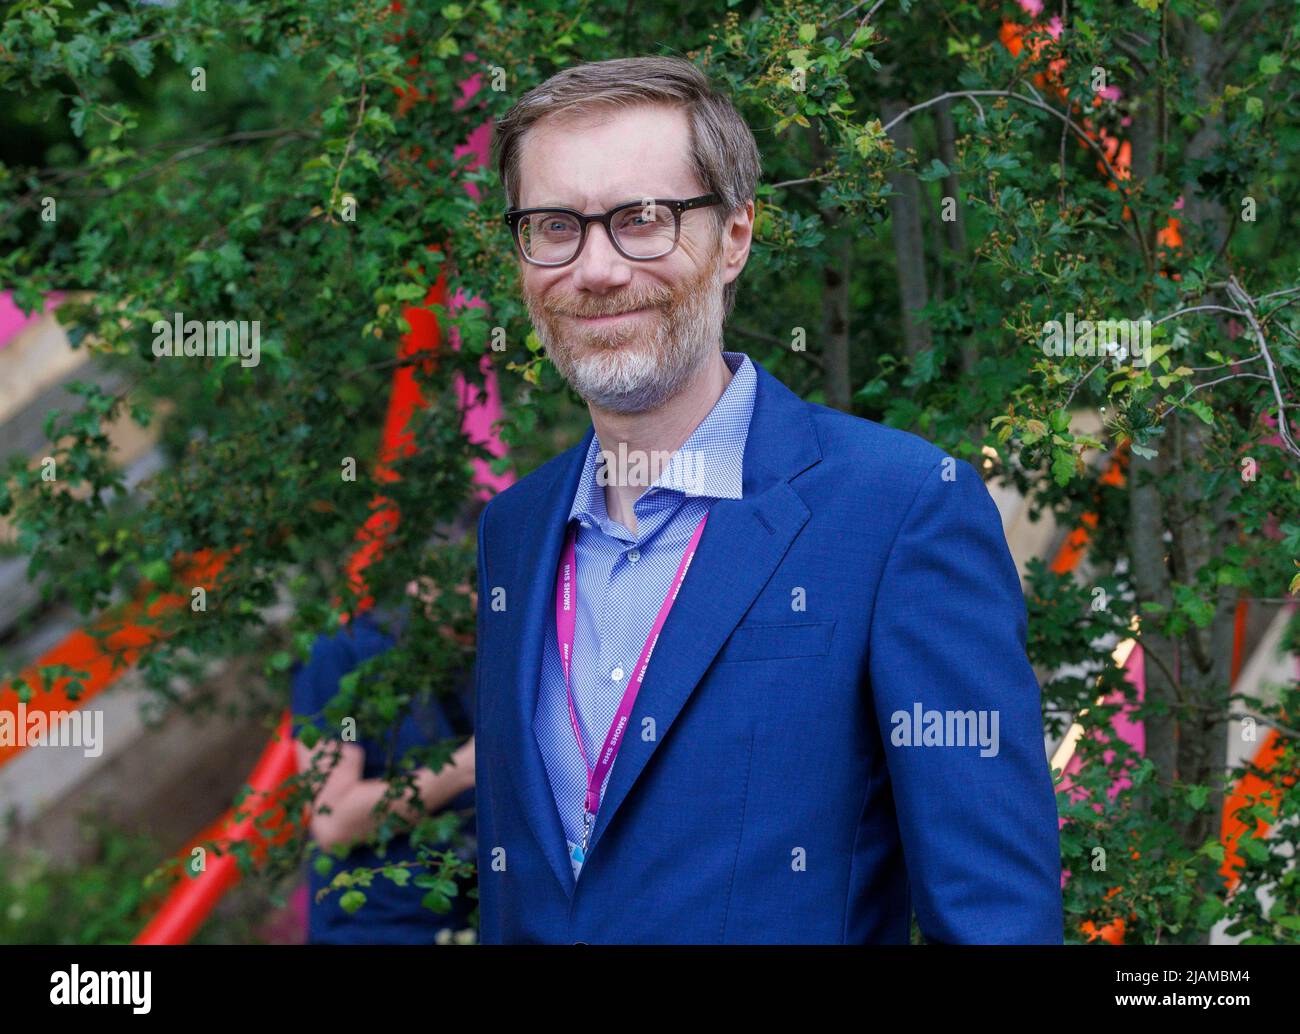 Stephen Merchant, actor, comedian, director, presenter and writer, at the RHS Chelsea Flower Show. Stock Photo